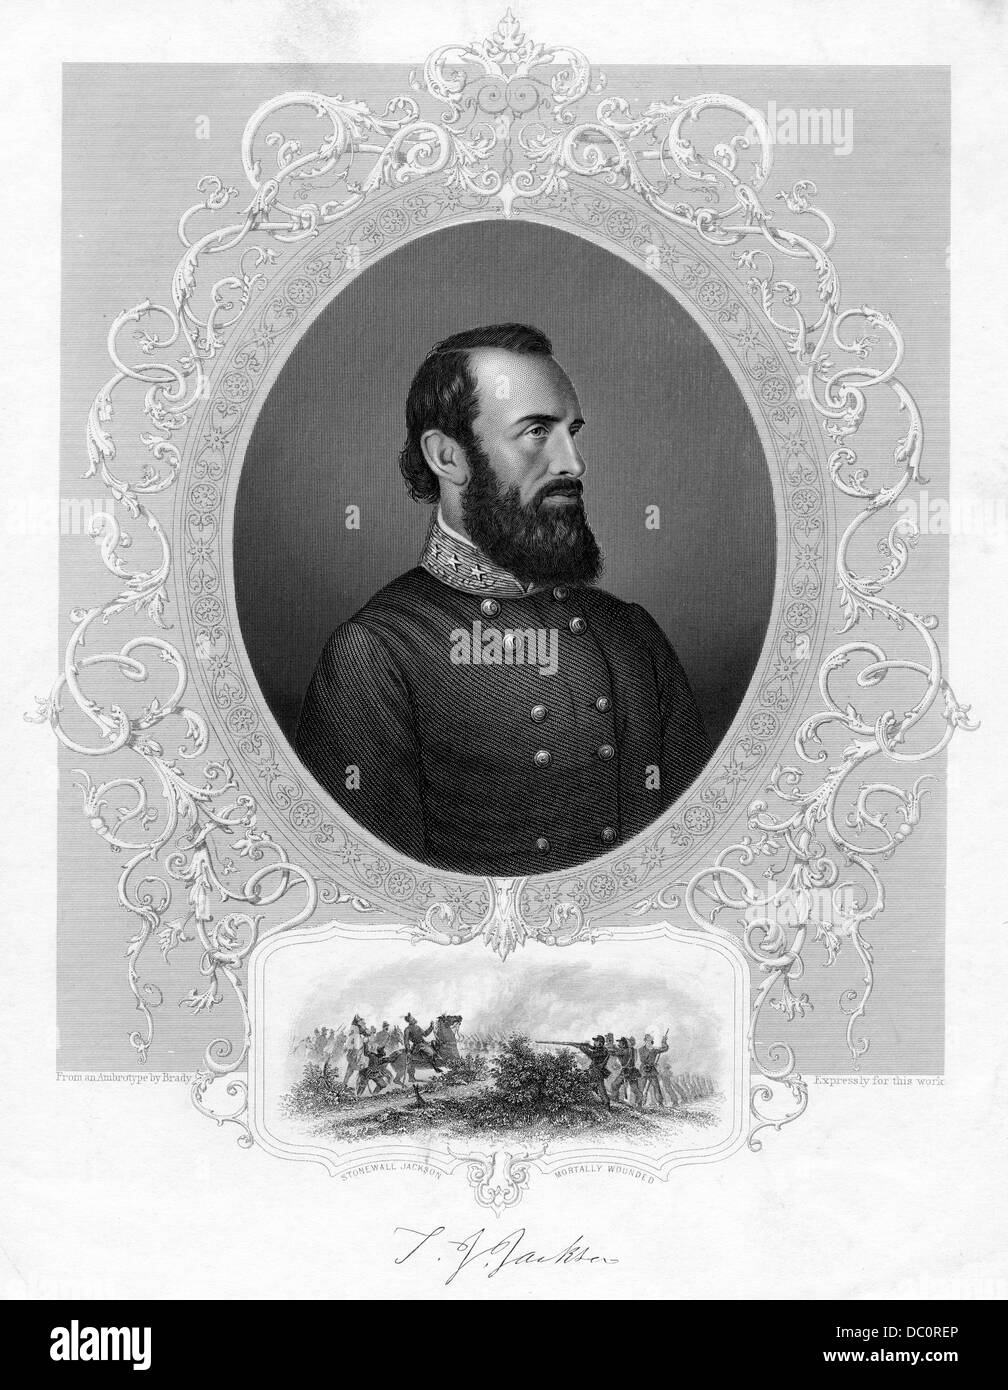 1800s 1860s THOMAS STONEWALL JACKSON CONFEDERATE GENERAL DURING AMERICAN CIVIL WAR WOUNDED AND DIED AT CHANCELLORSVILLE MAY 1863 Stock Photo